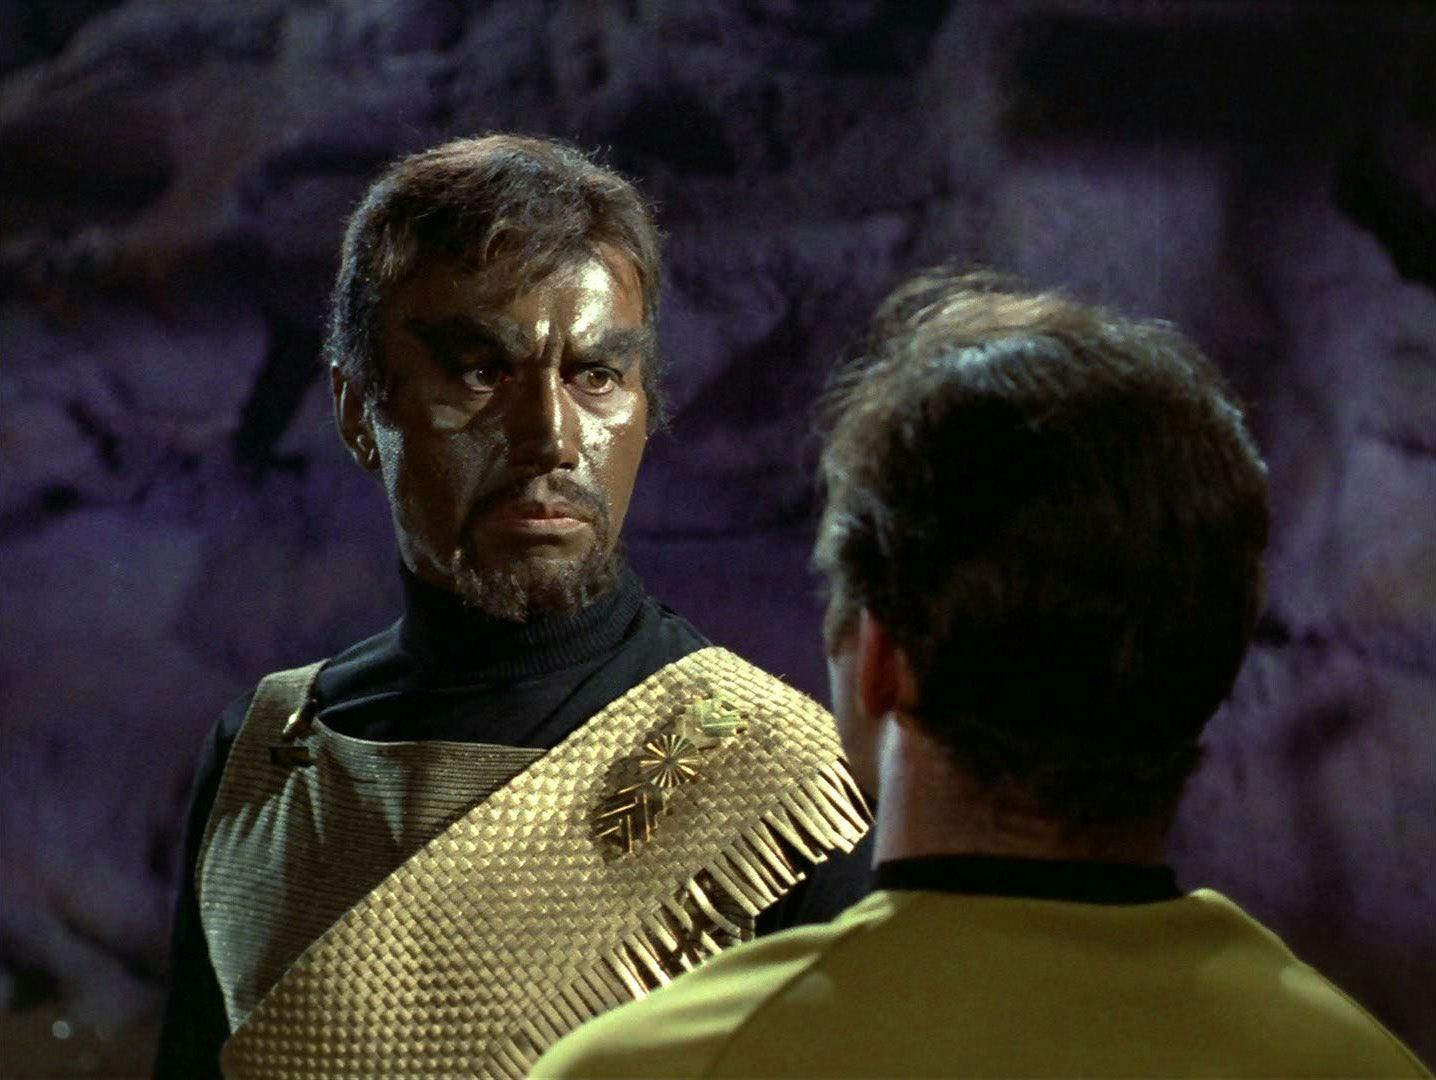 Close-up of Klingon Commander Kang as he looks directly at Captain Kirk in 'Day of the Dove'